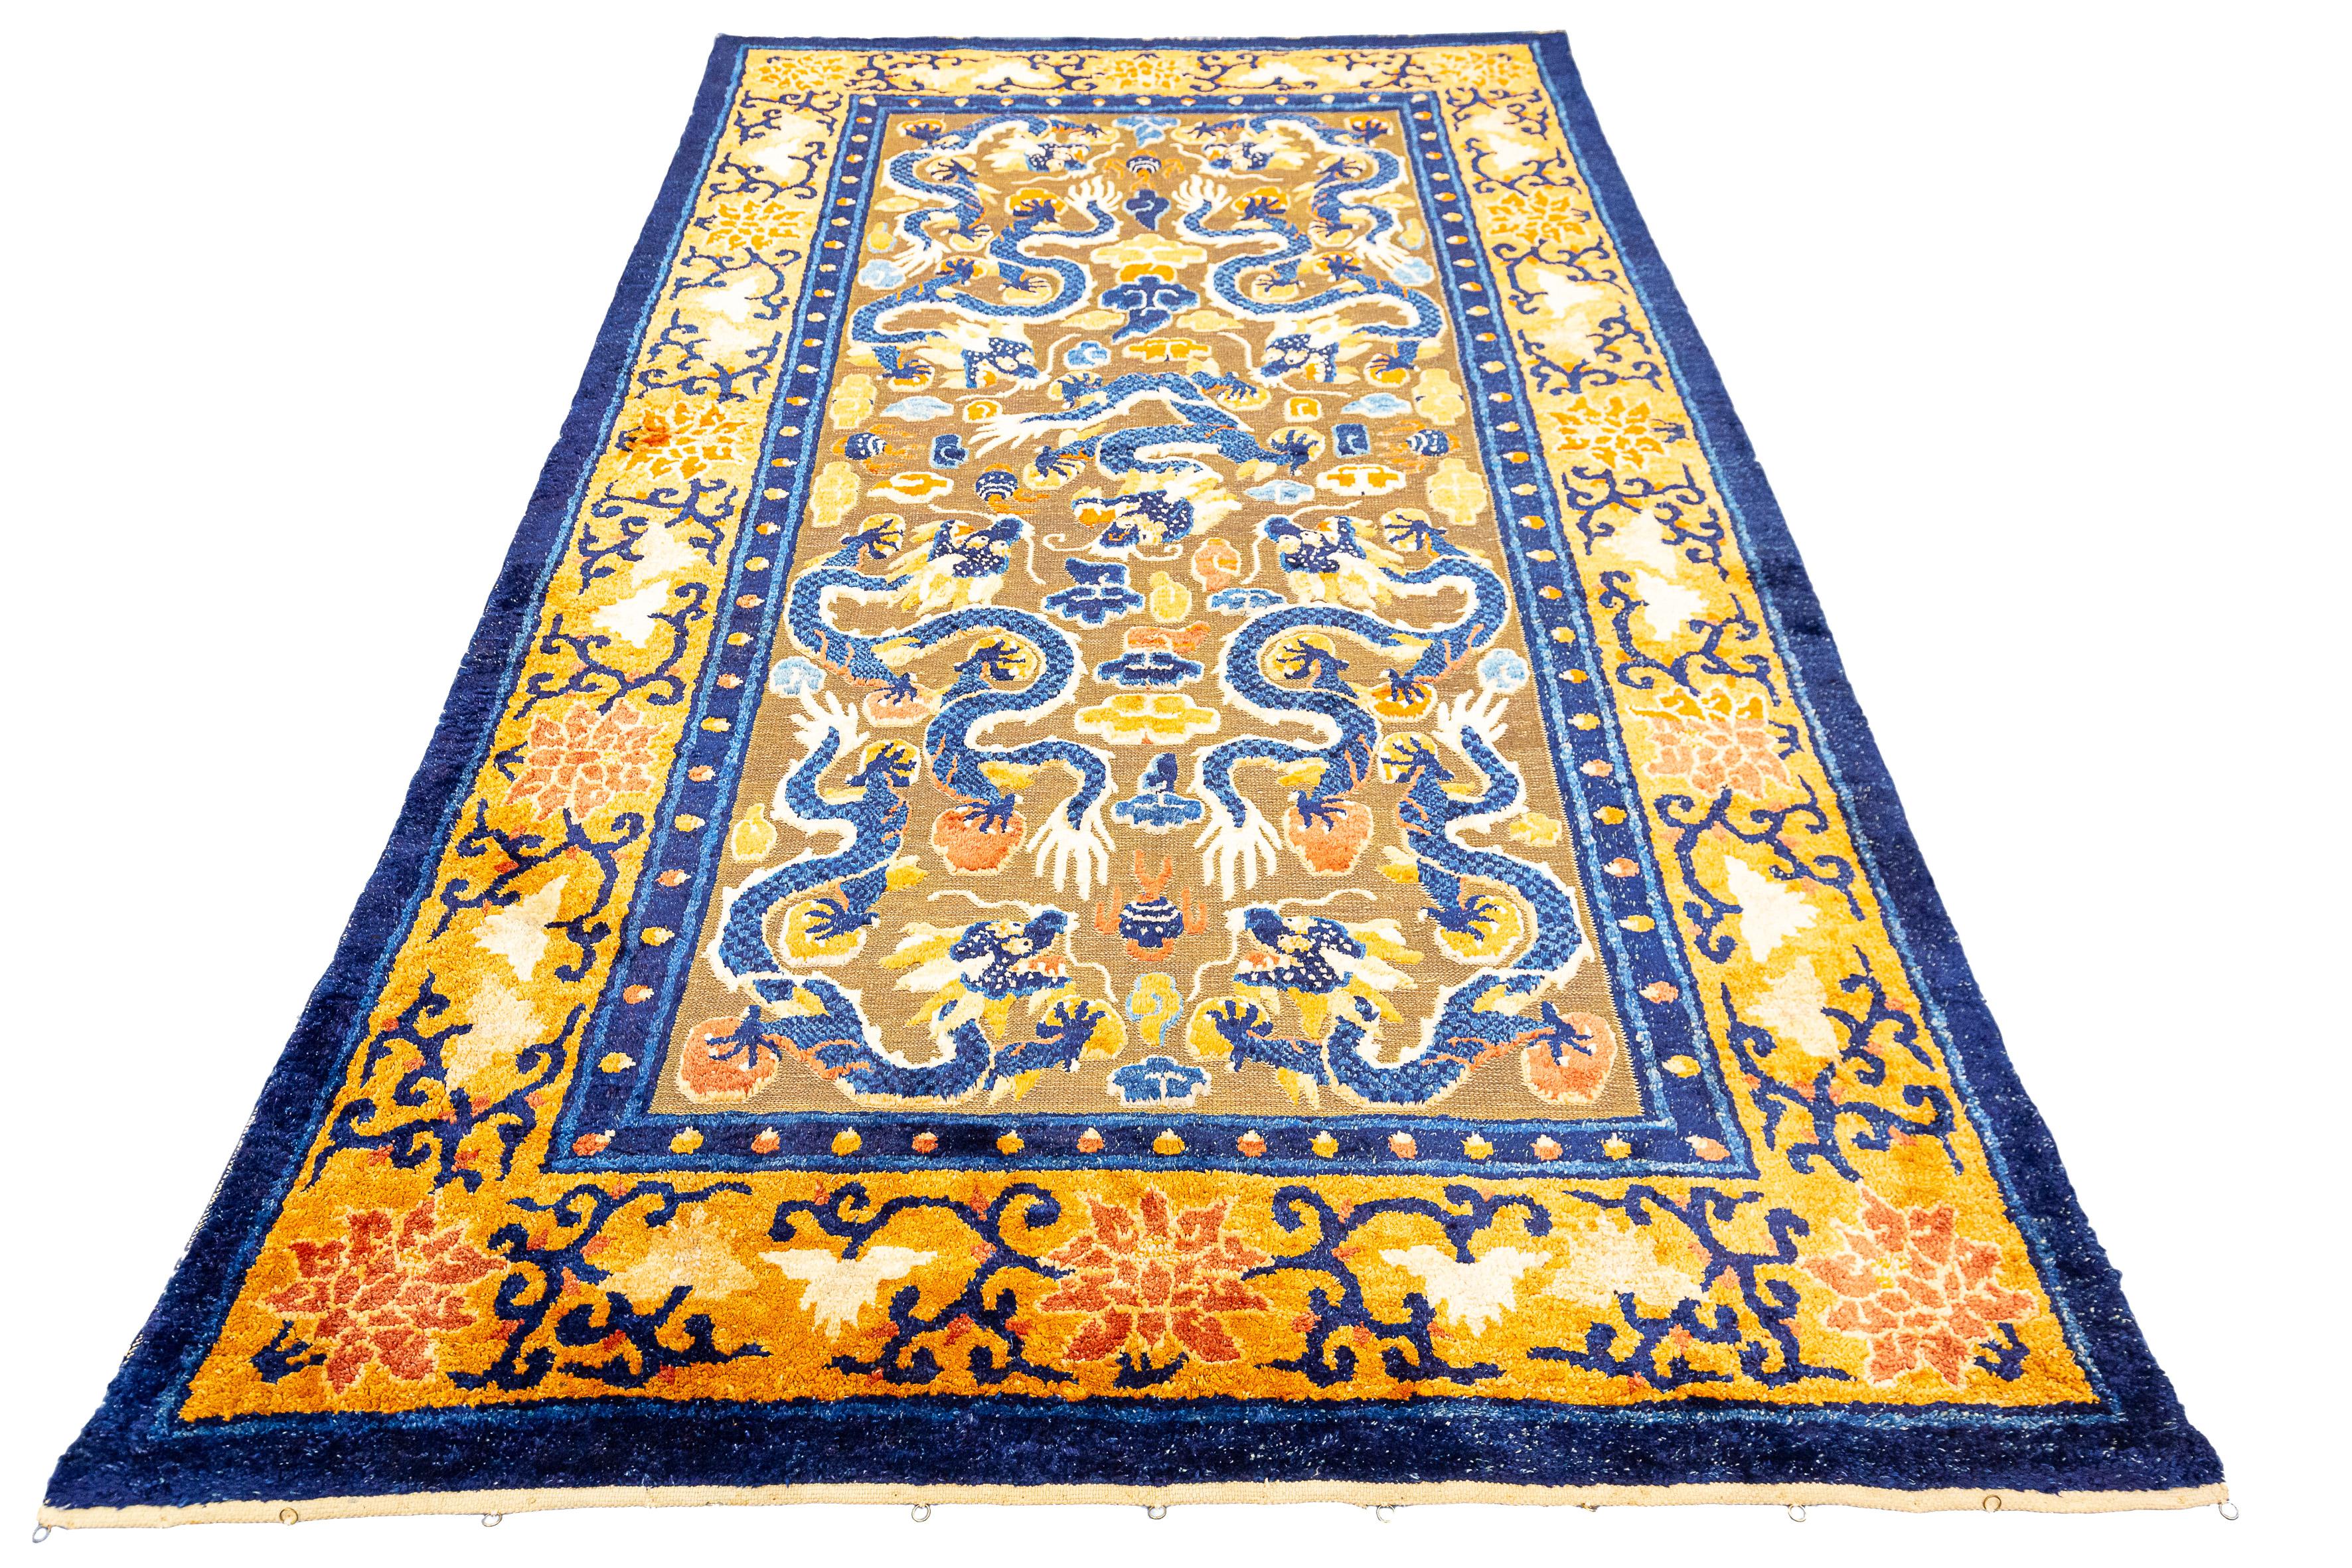 Prepare to be transported to a world of imperial grandeur and timeless elegance with our Imperial Silk & Metal Thread Chinese Rug, a masterpiece that showcases the pinnacle of Chinese artistry. This rug features a stunning design of nine mighty